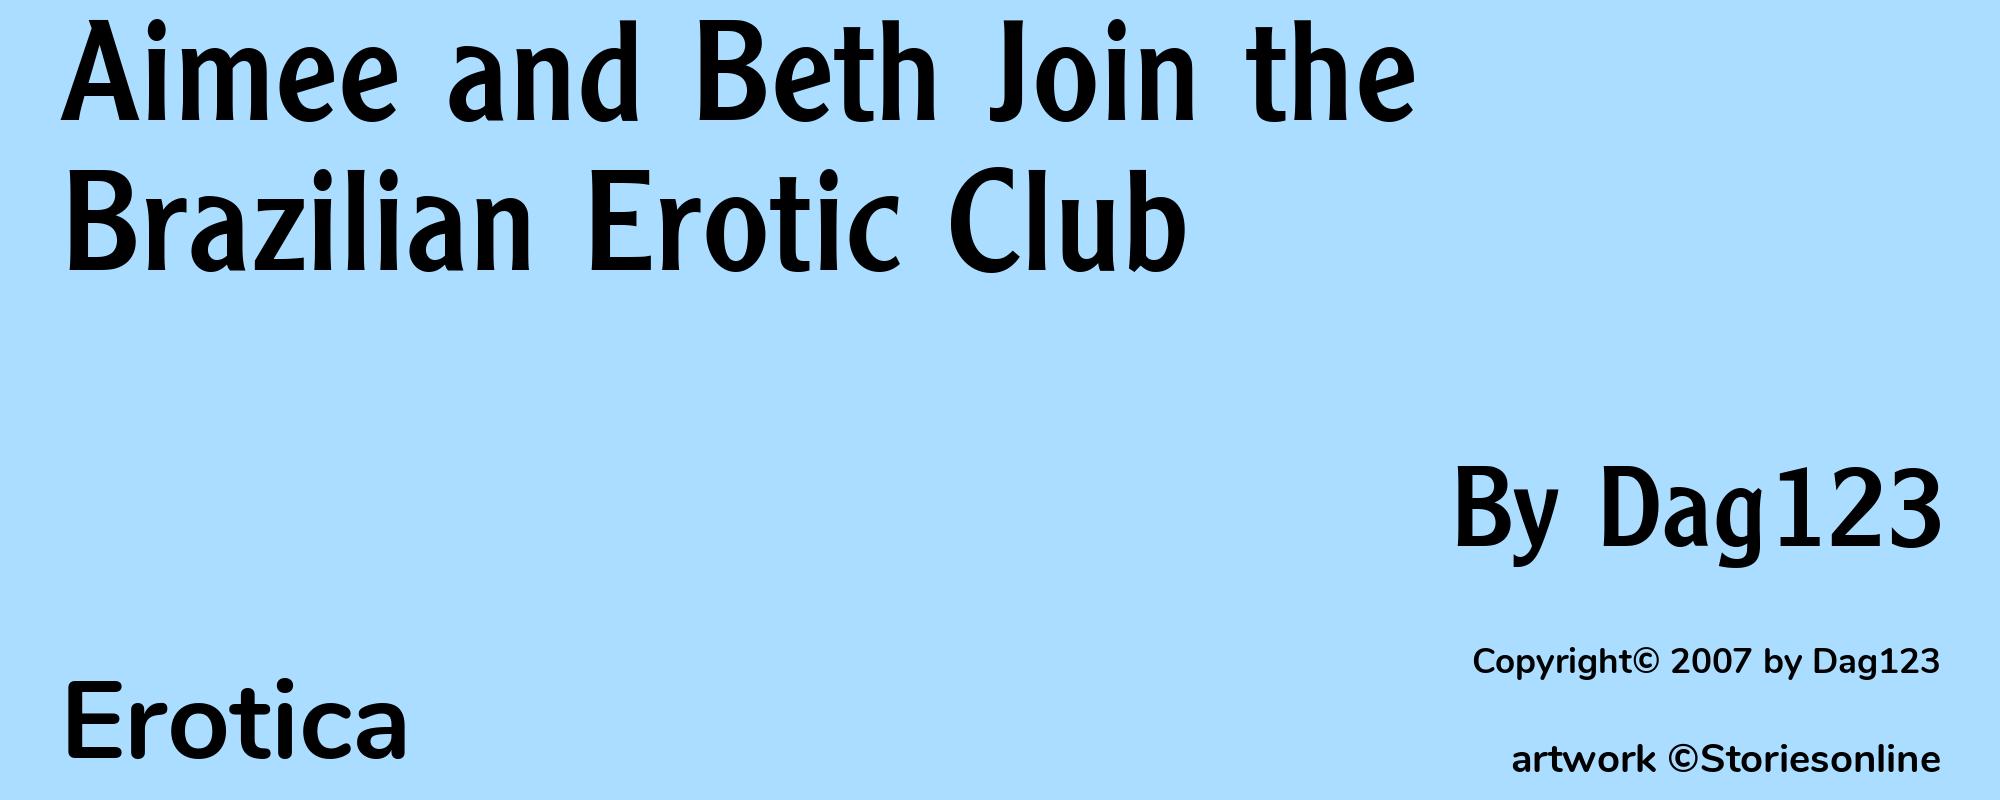 Aimee and Beth Join the Brazilian Erotic Club - Cover